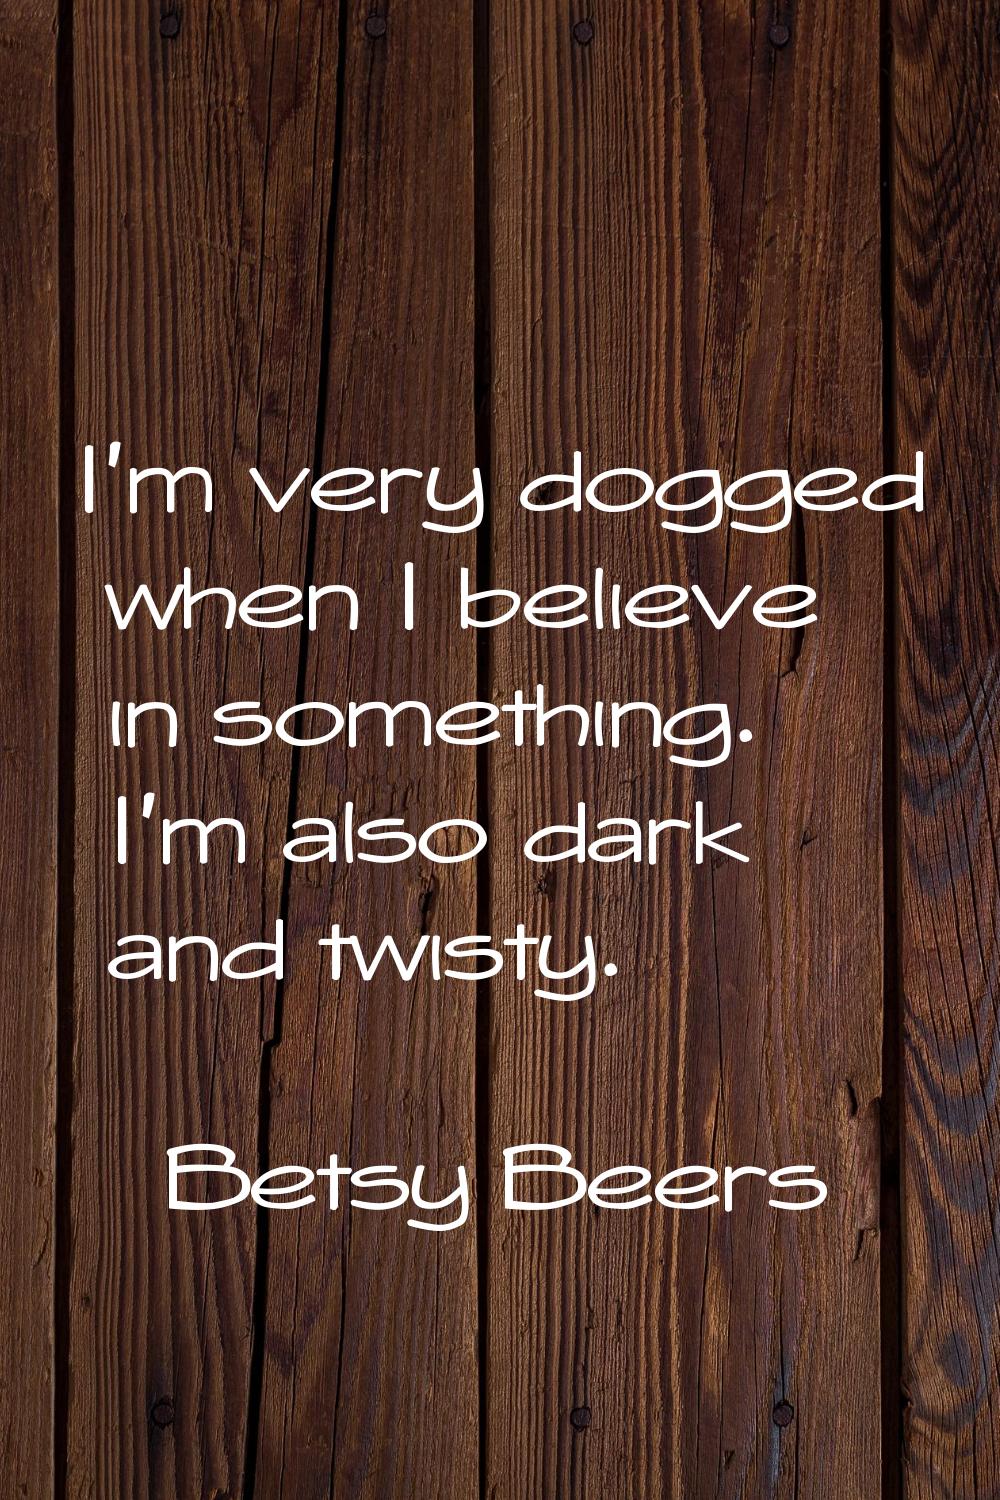 I'm very dogged when I believe in something. I'm also dark and twisty.